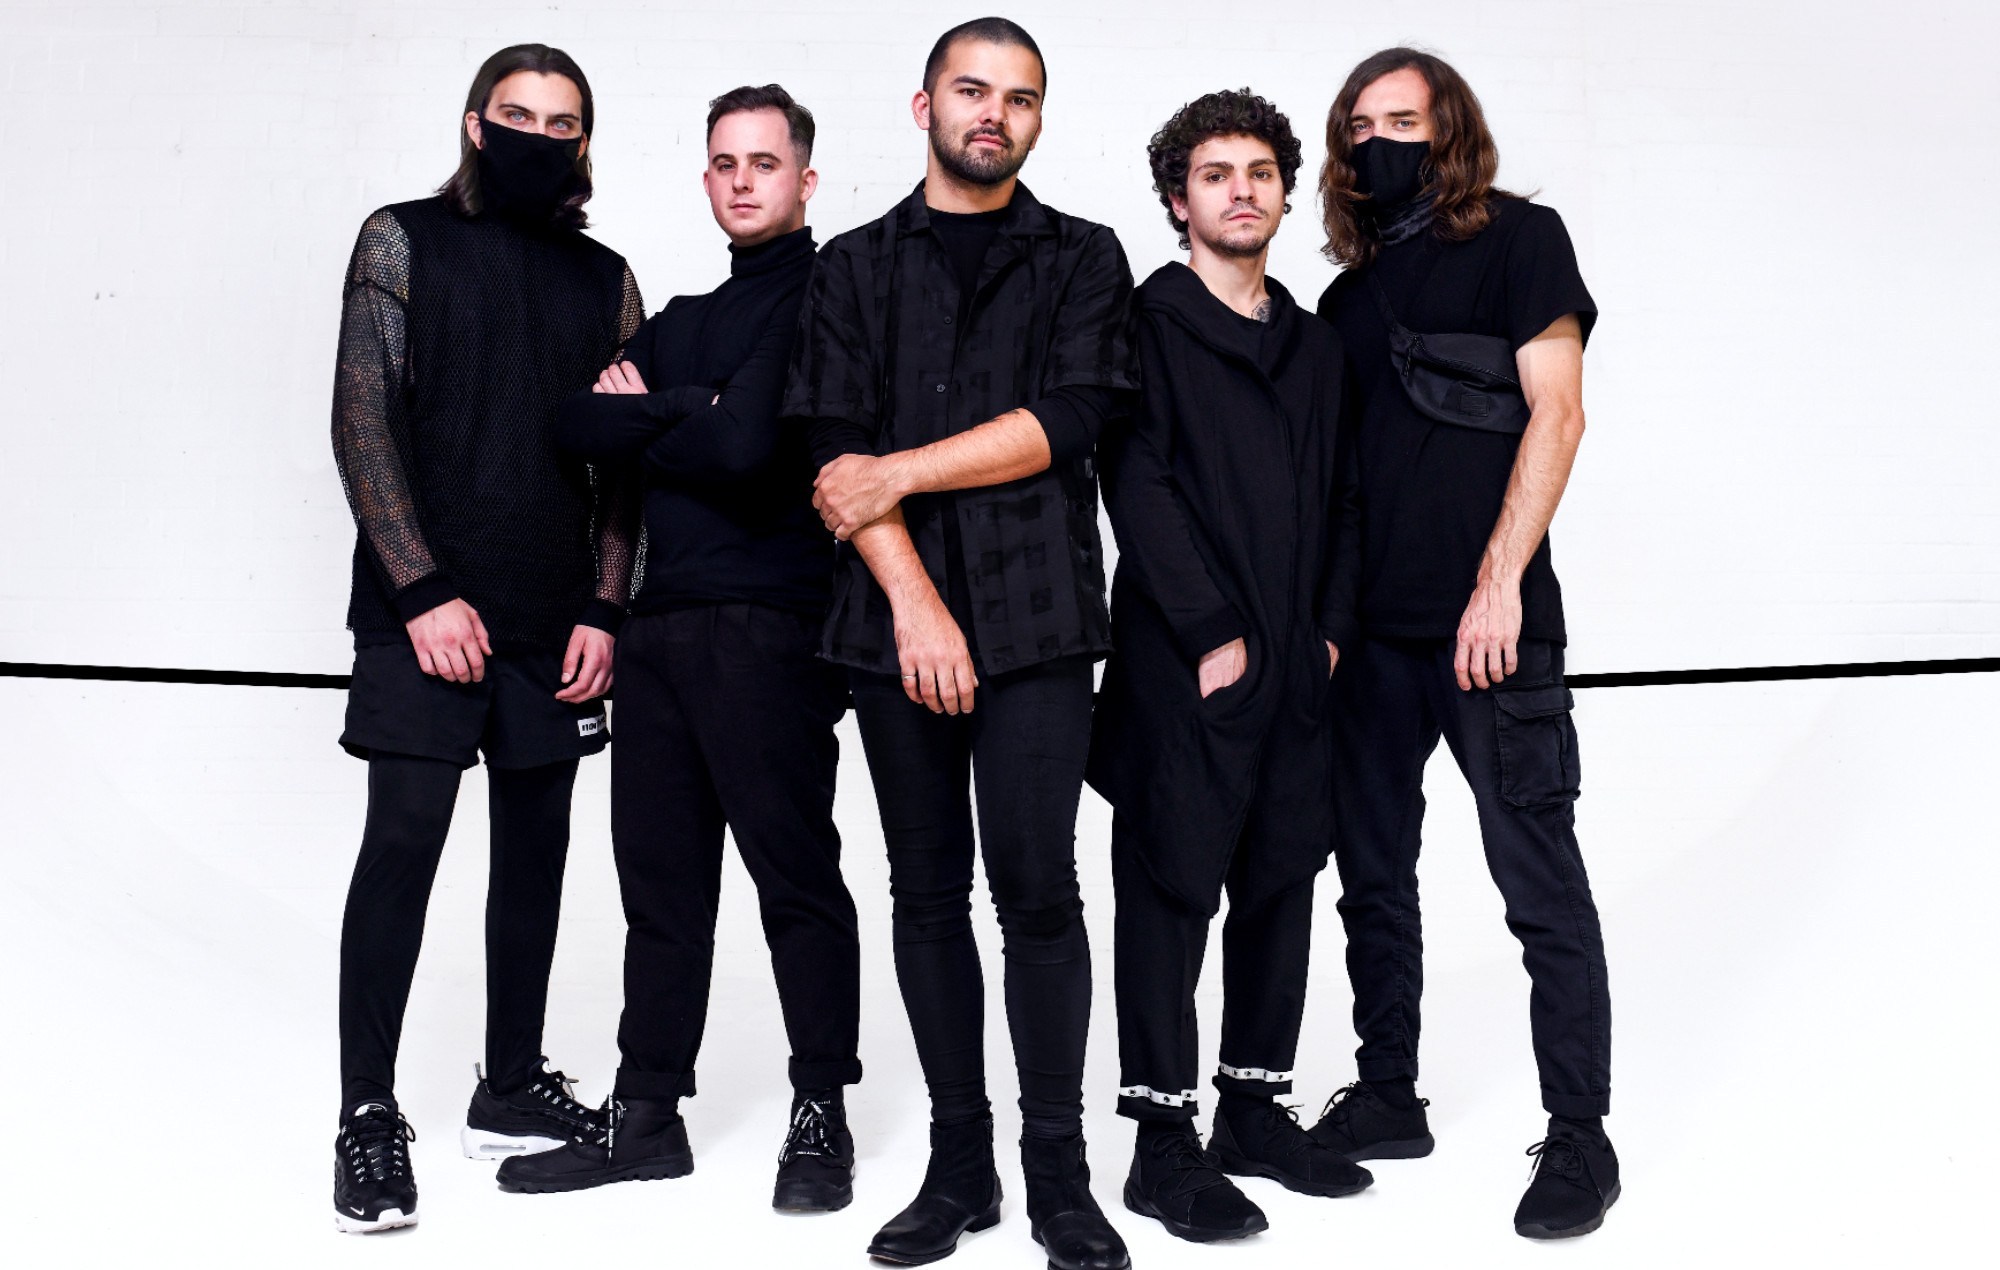 WATCH NORTHLANE PERFORM “BLOODLINE” FROM ‘LIVE AT THE ROUNDHOUSE’